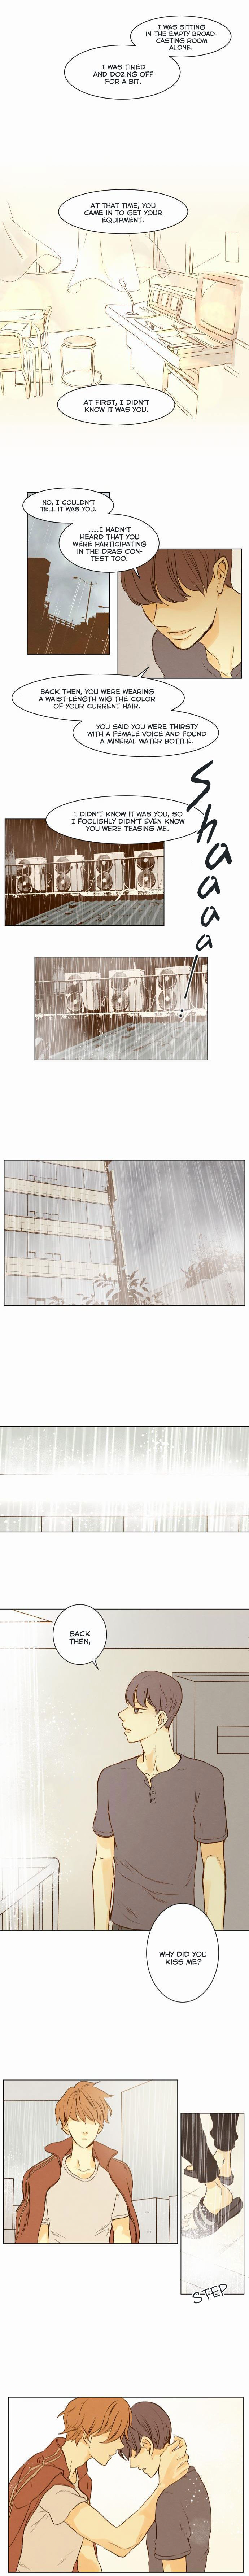 That Summer (KIM Hyun) Chapter 009 page 8